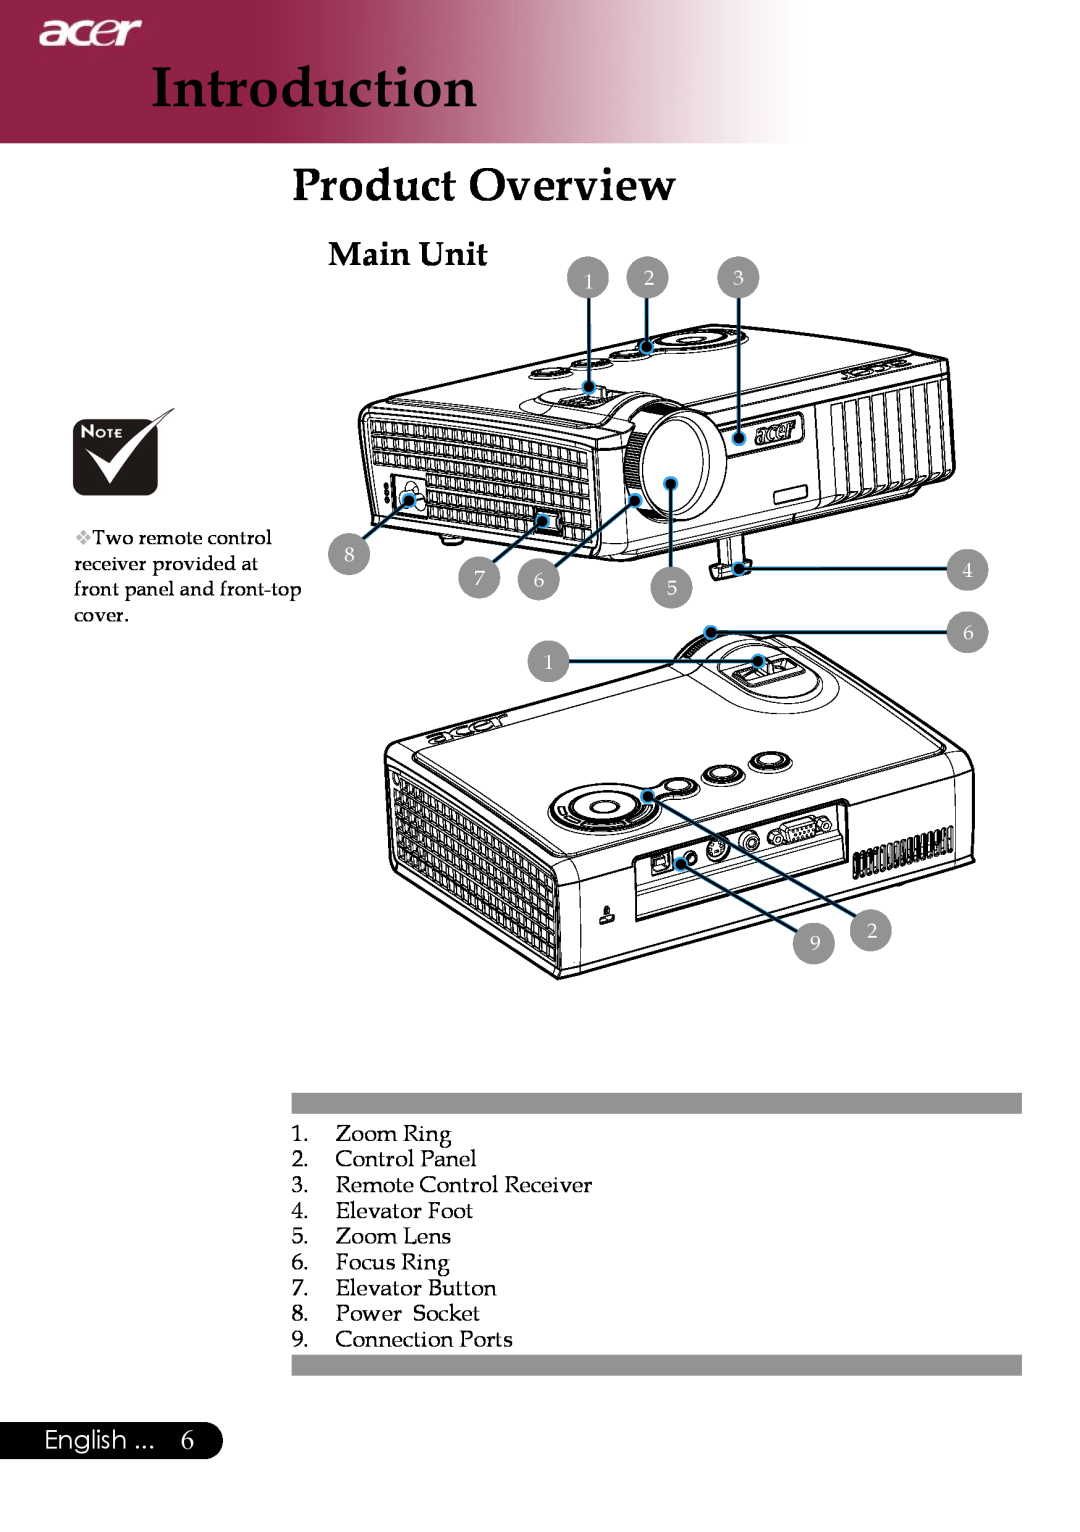 Acer PD323, PD311 manual Product Overview, Introduction, Main Unit, English 